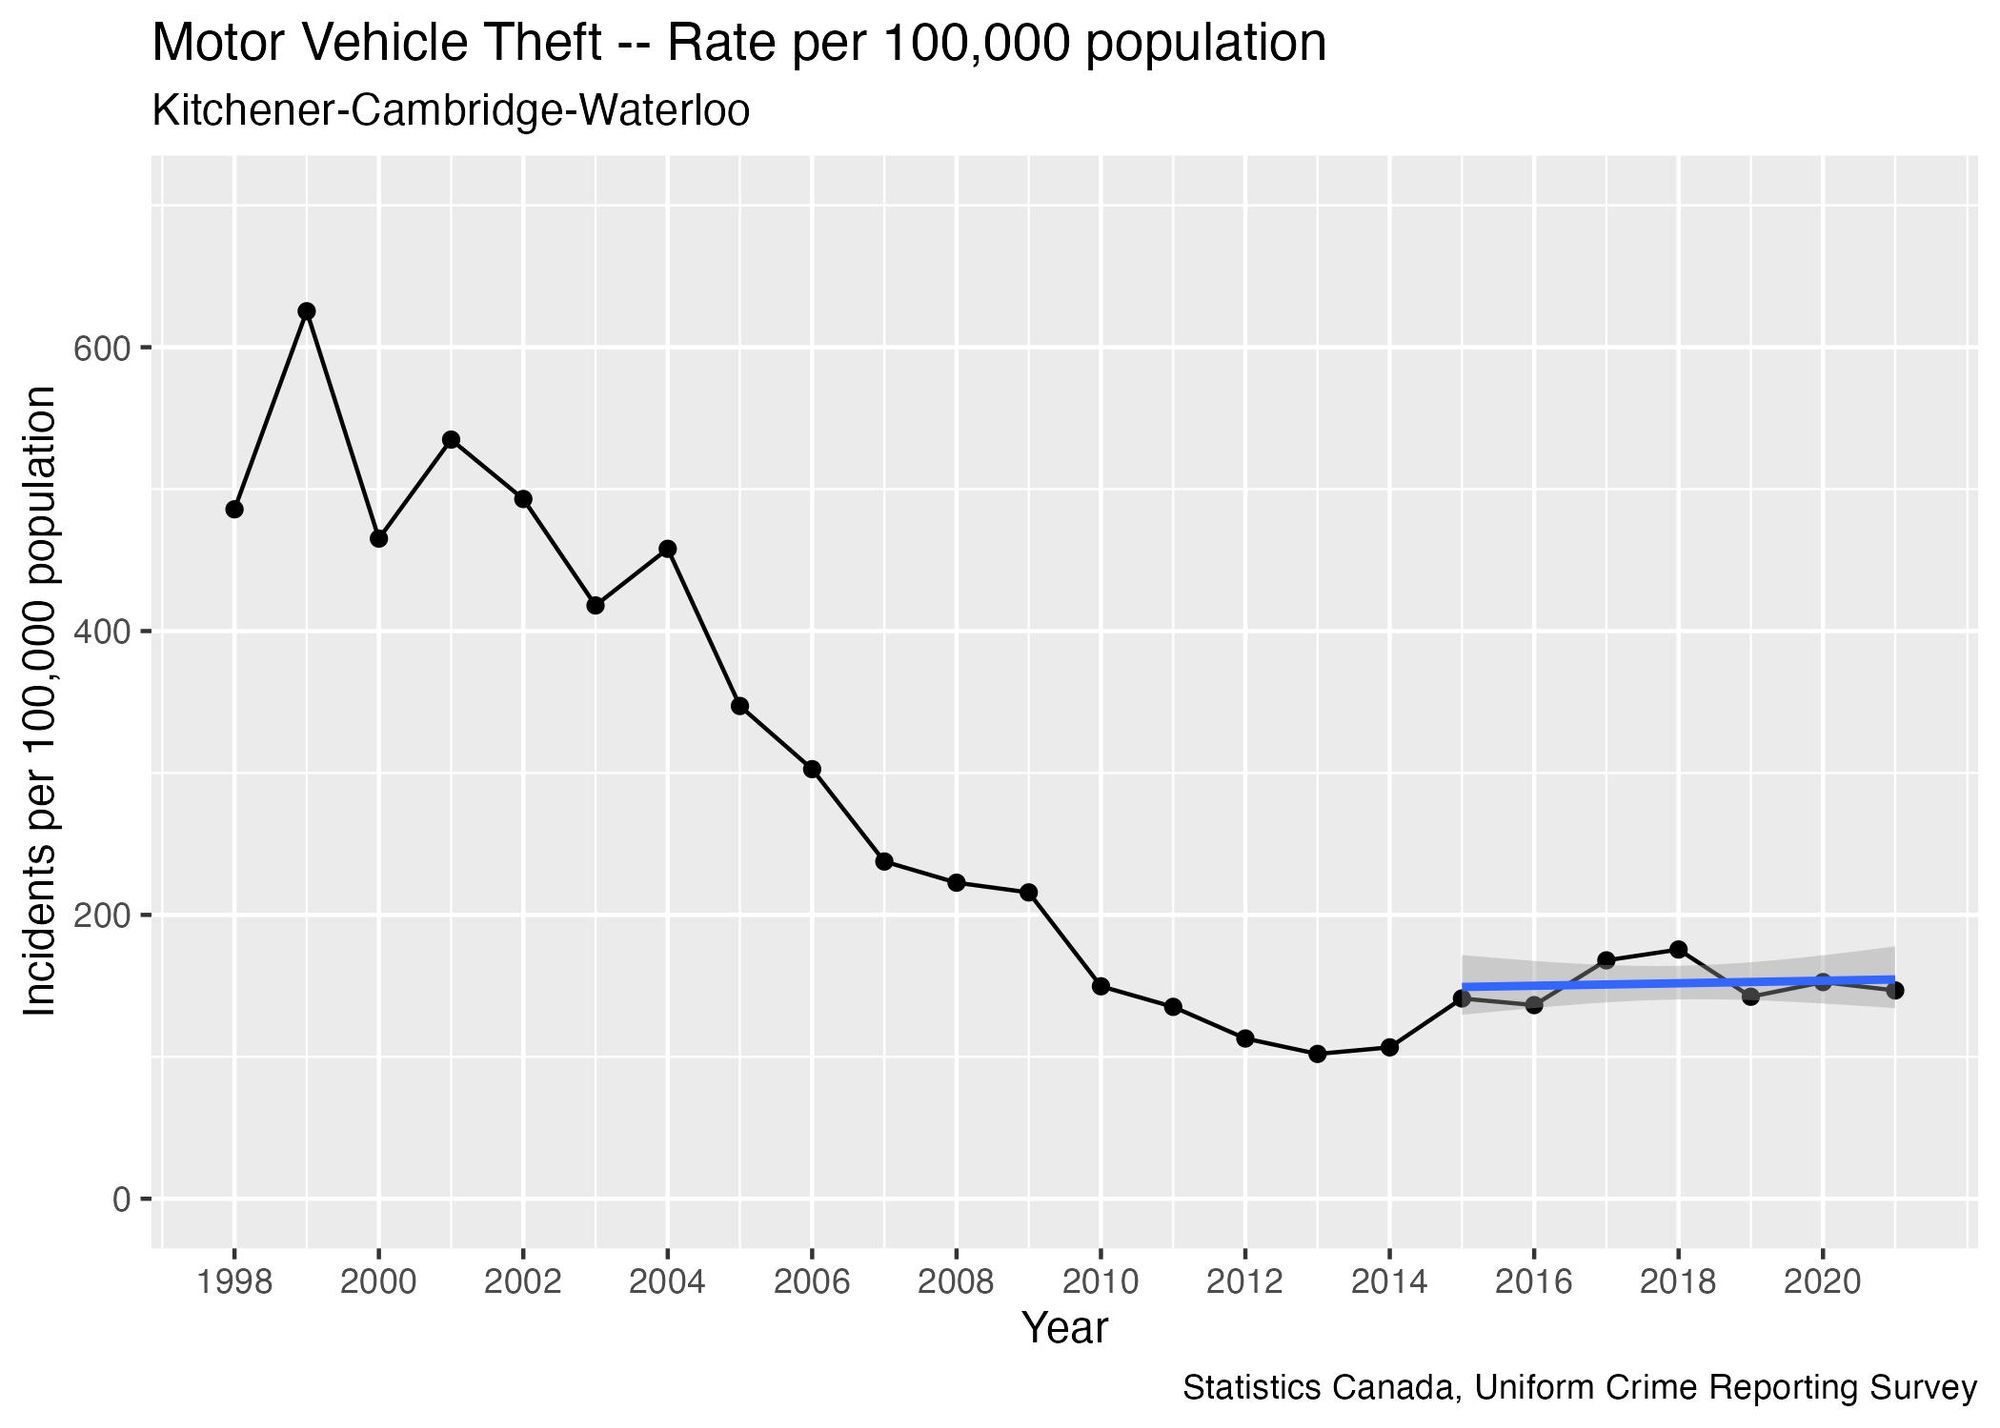 A graph of “Motor Vehicle Theft – Rate per 100,000 population” for Kitchener-Cambridge-Waterloo. The graph starts out around the 500-600 range in 1998 - 2002, then gradually decreases to a level around 150 by 2010, and stays in the 150-200 range thereafter. A blue line, nearly horizontal, has been overlaid on the years 2015-2021.